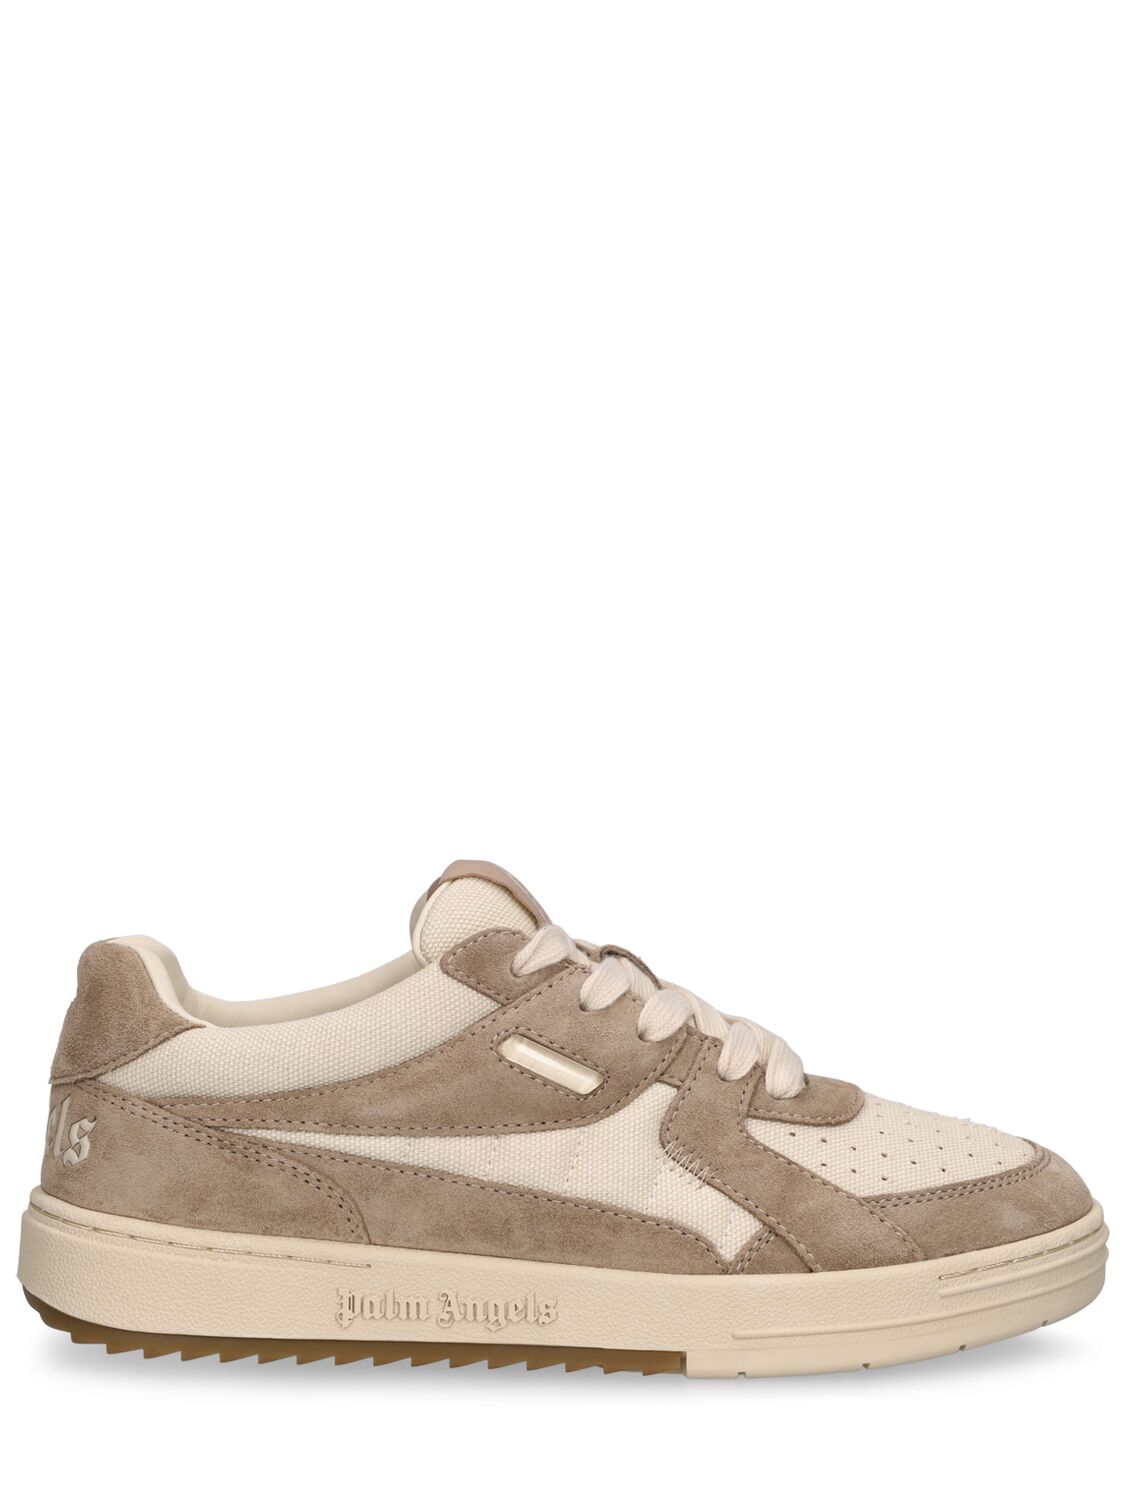 Palm University Suede Sneakers